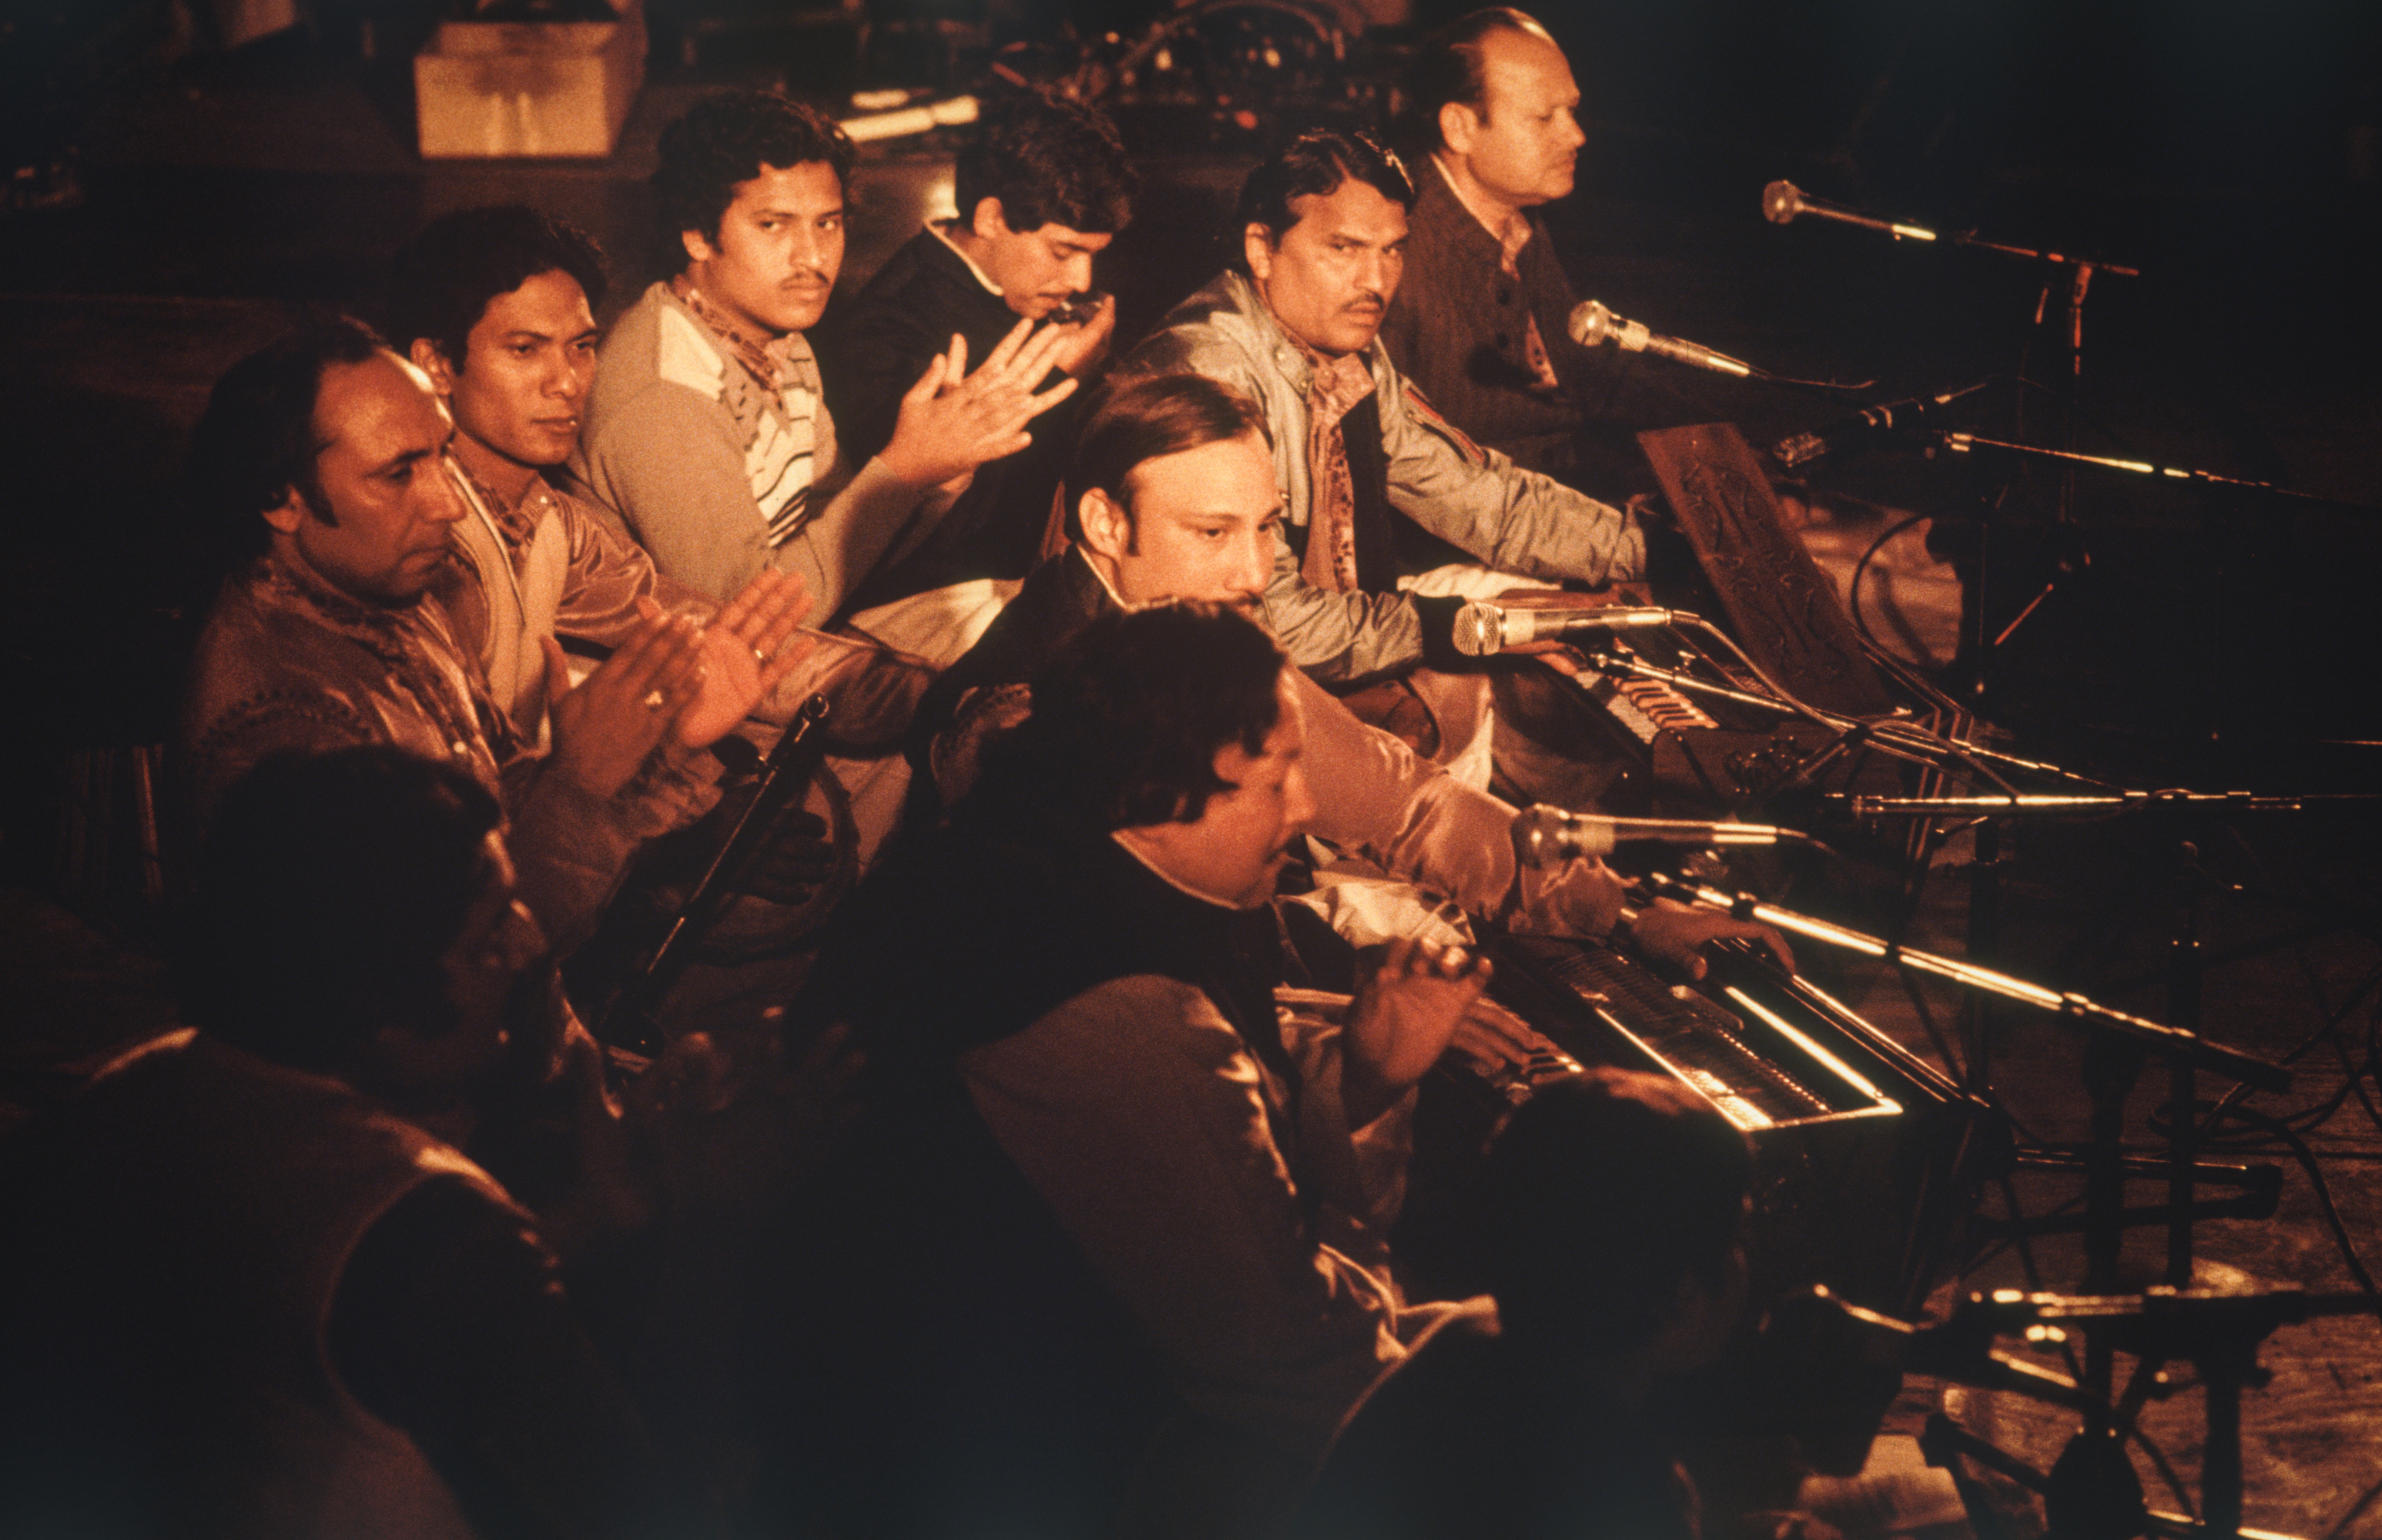 Nusrat Fateh Ali Khan & Party - Live at WOMAD 1985